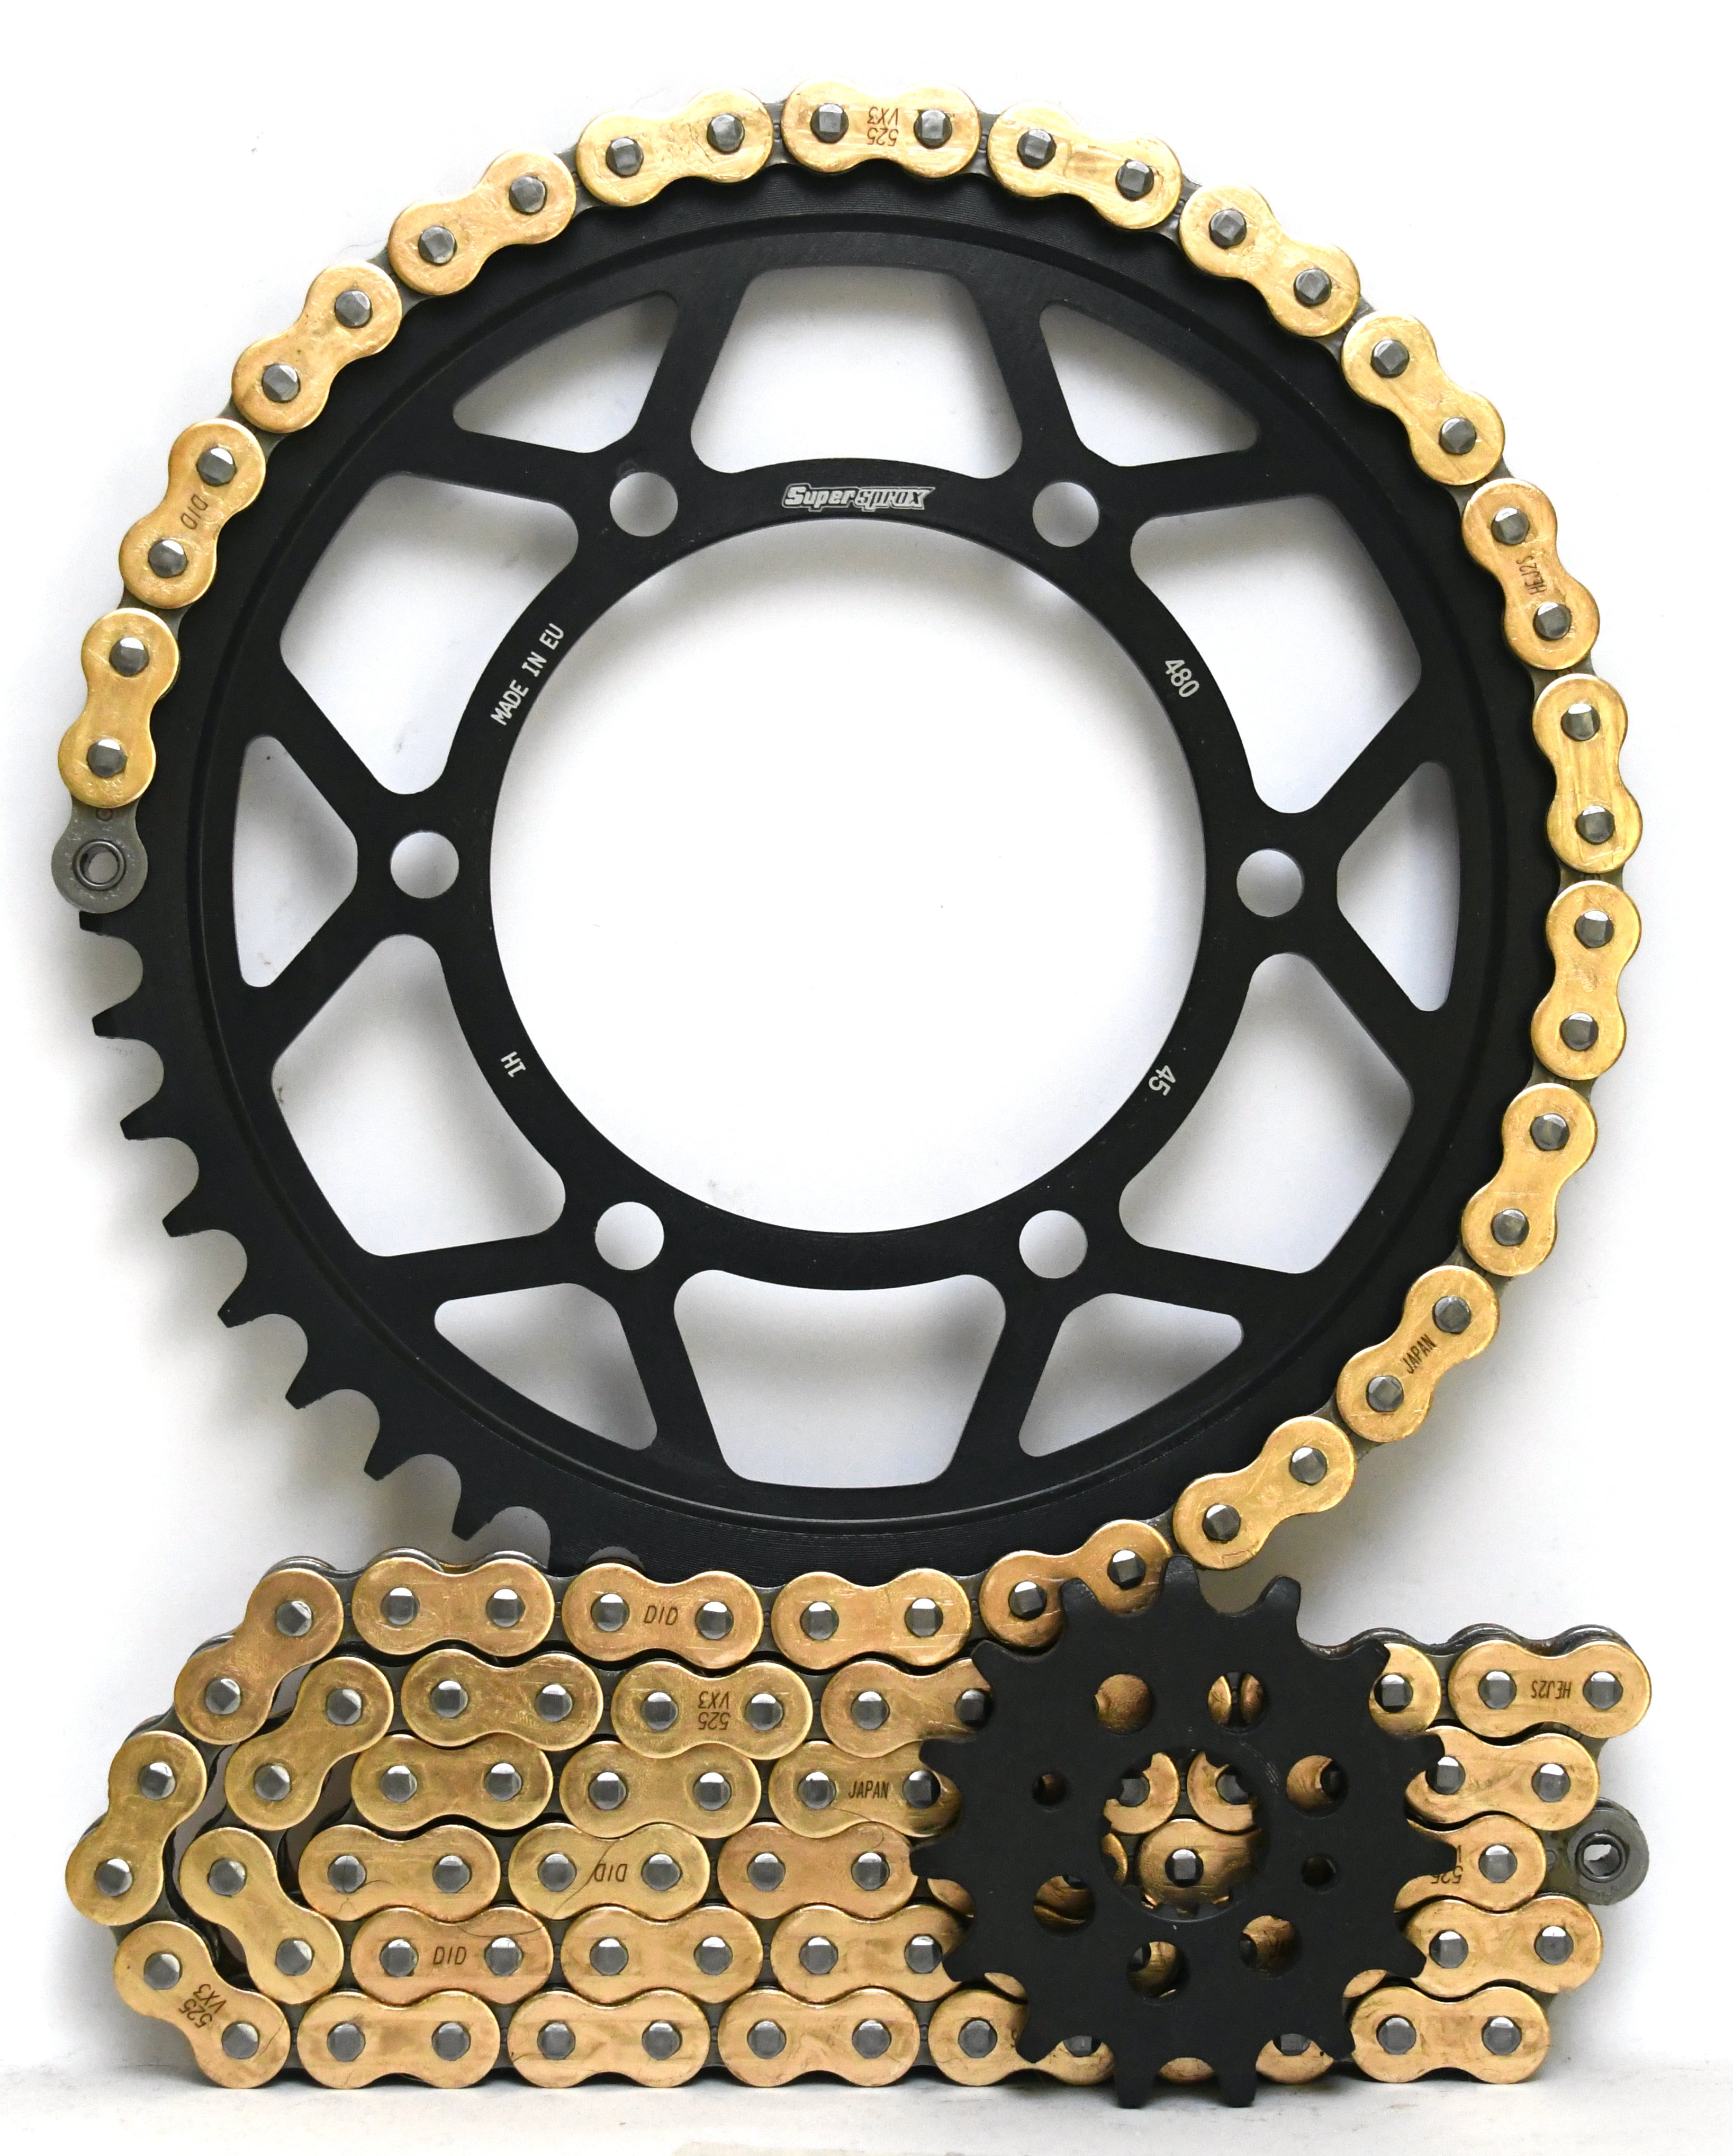 Supersprox and DID Chain and Steel Sprocket Kit - Yamaha MT-10 (Inc SP) 2022 On Standard Gearing